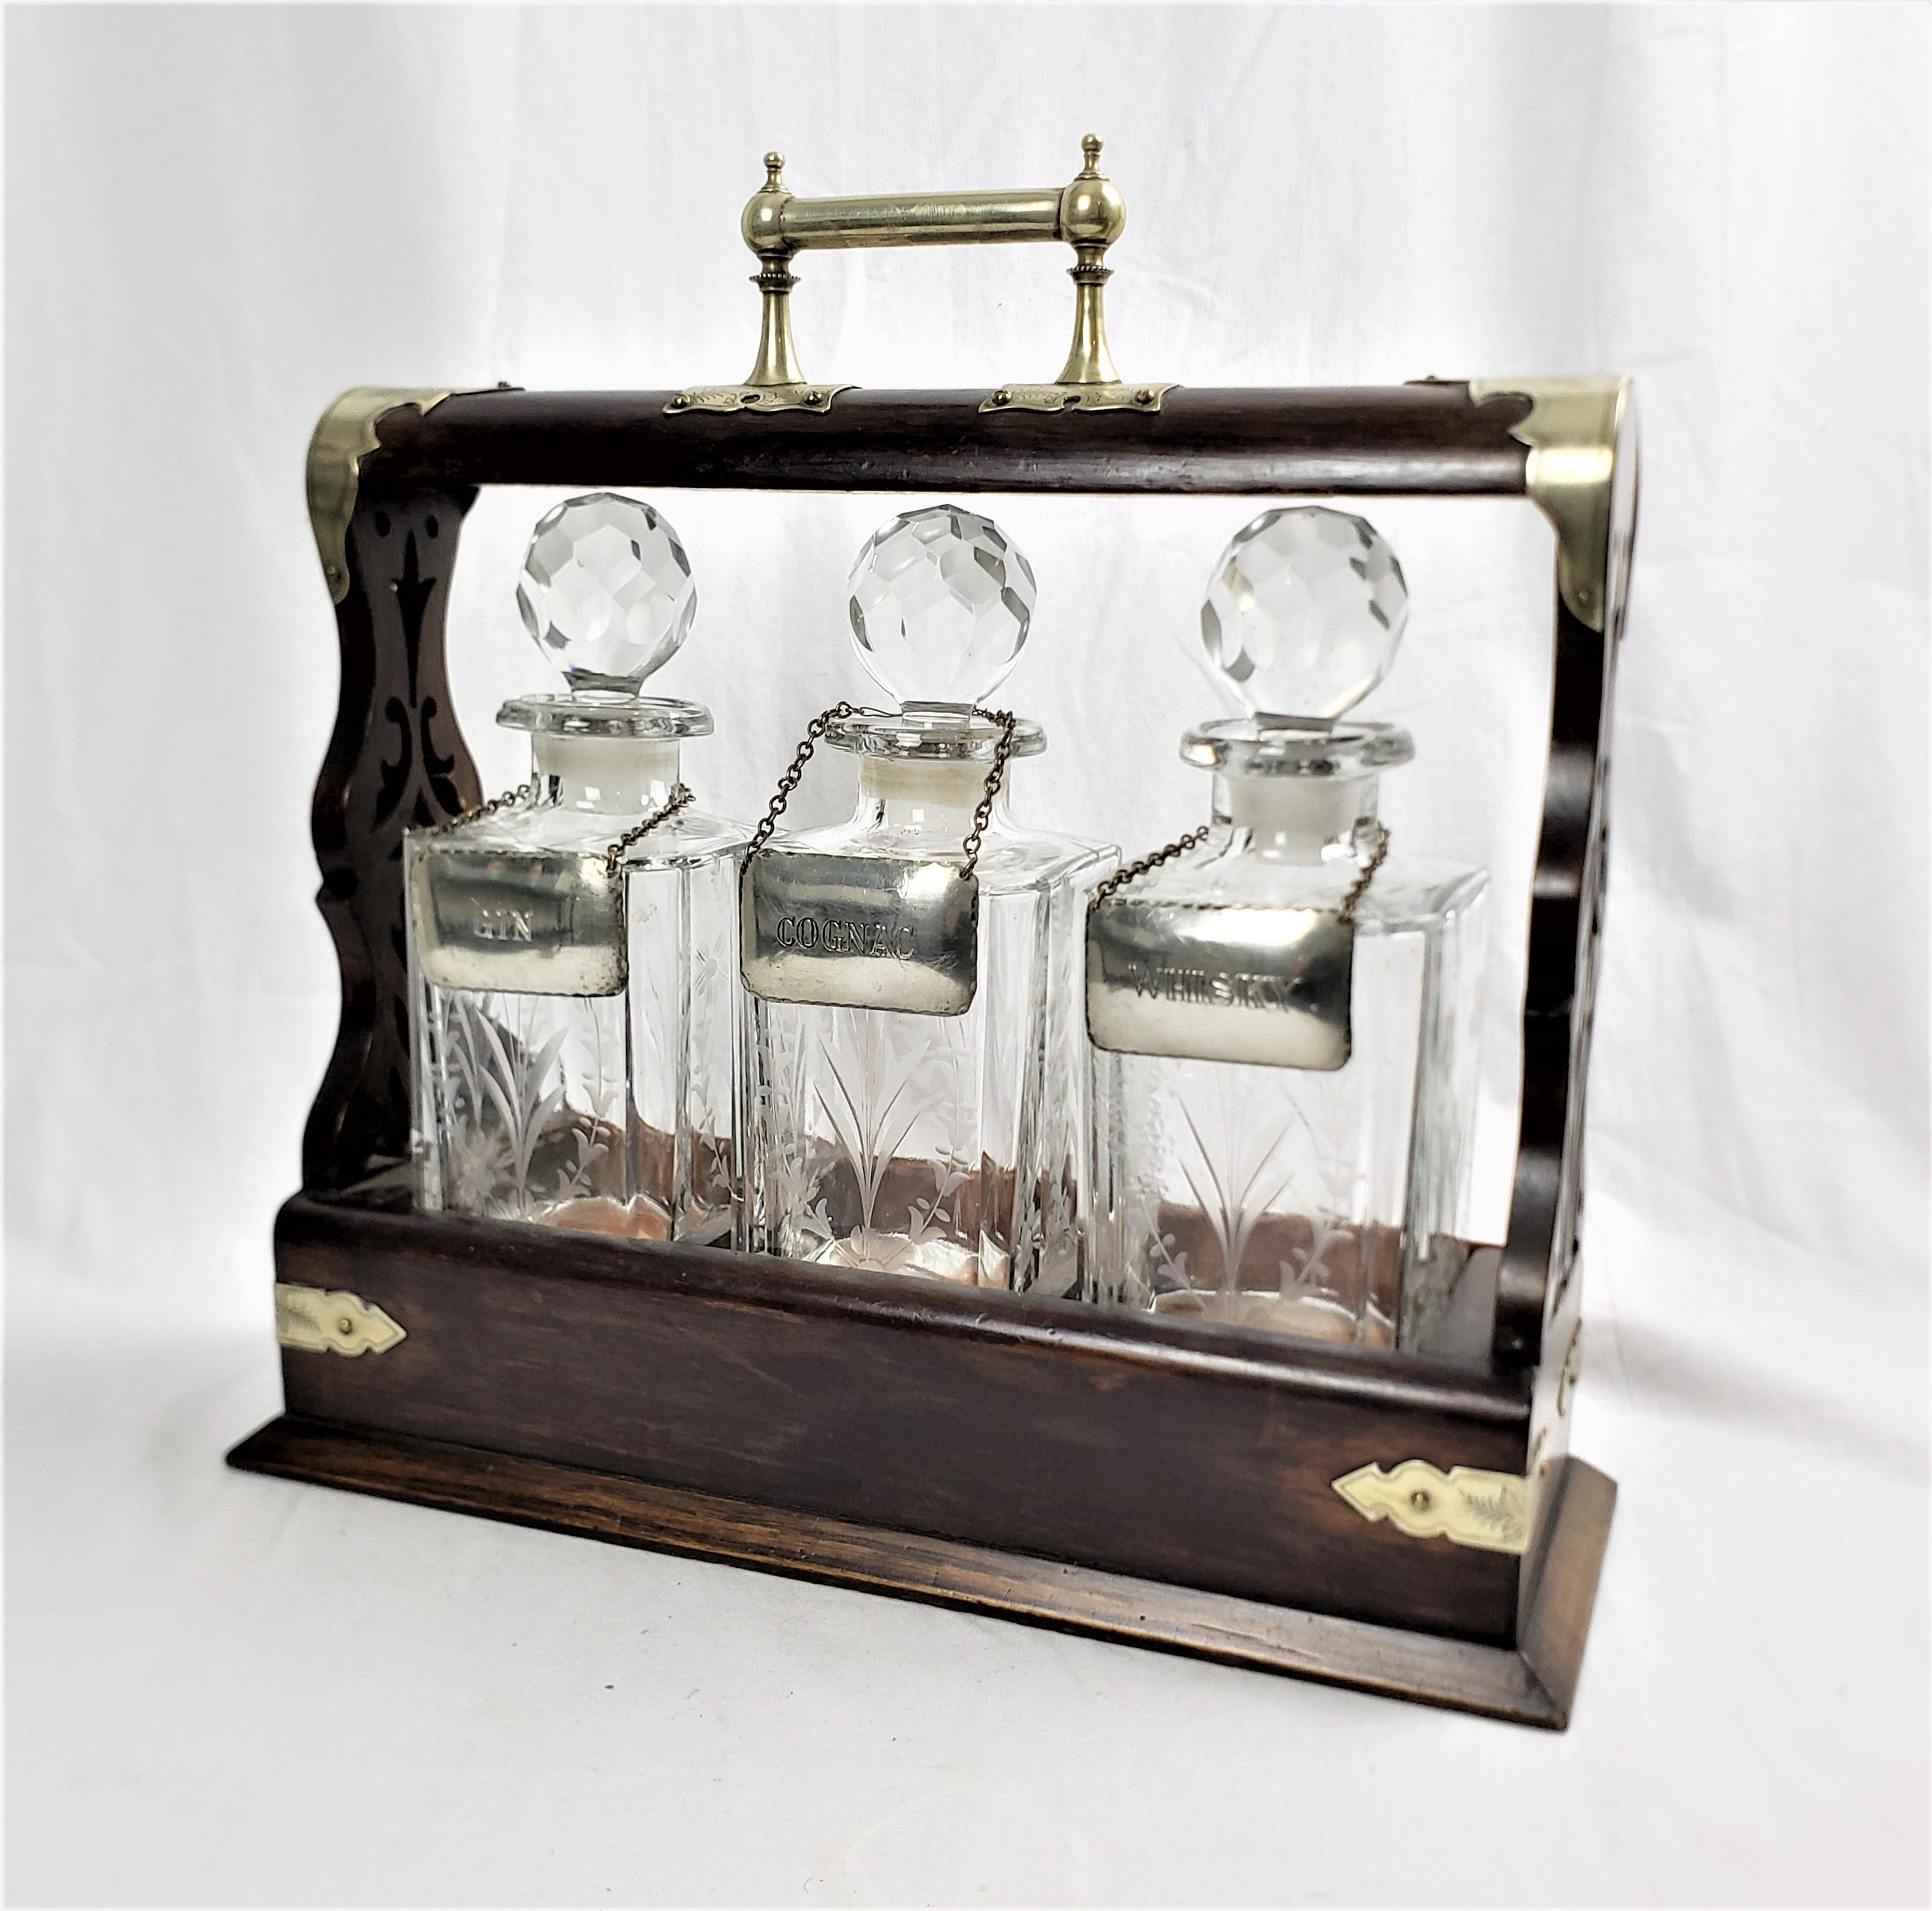 This antique tantalus set is unsigned, but presumed to have originated from England and date to approximately 1900 and done in the period Edwardian style. The case is composed of oak with silver or nickel plated mounts. The squared bottles are